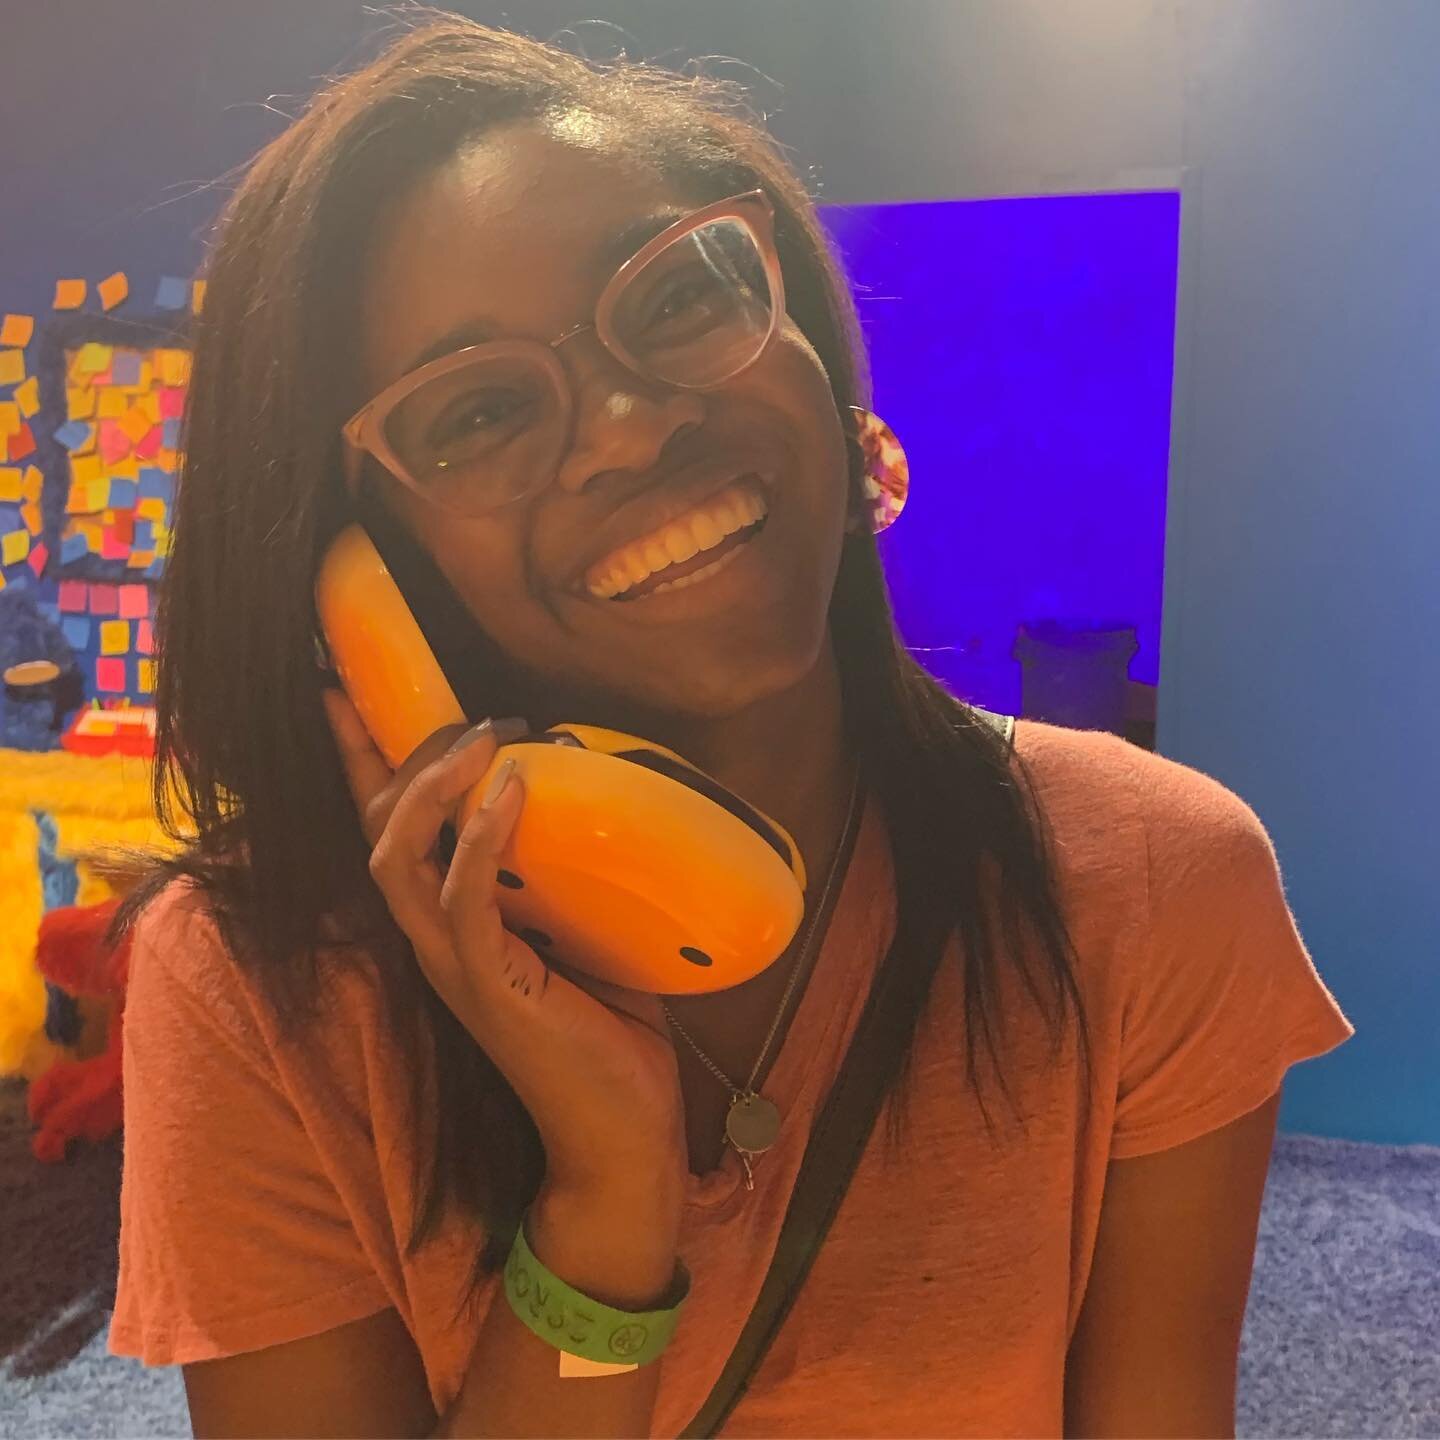 It&rsquo;s a hamburger phone! 🍔 And other oddities while exploring @29rooms.